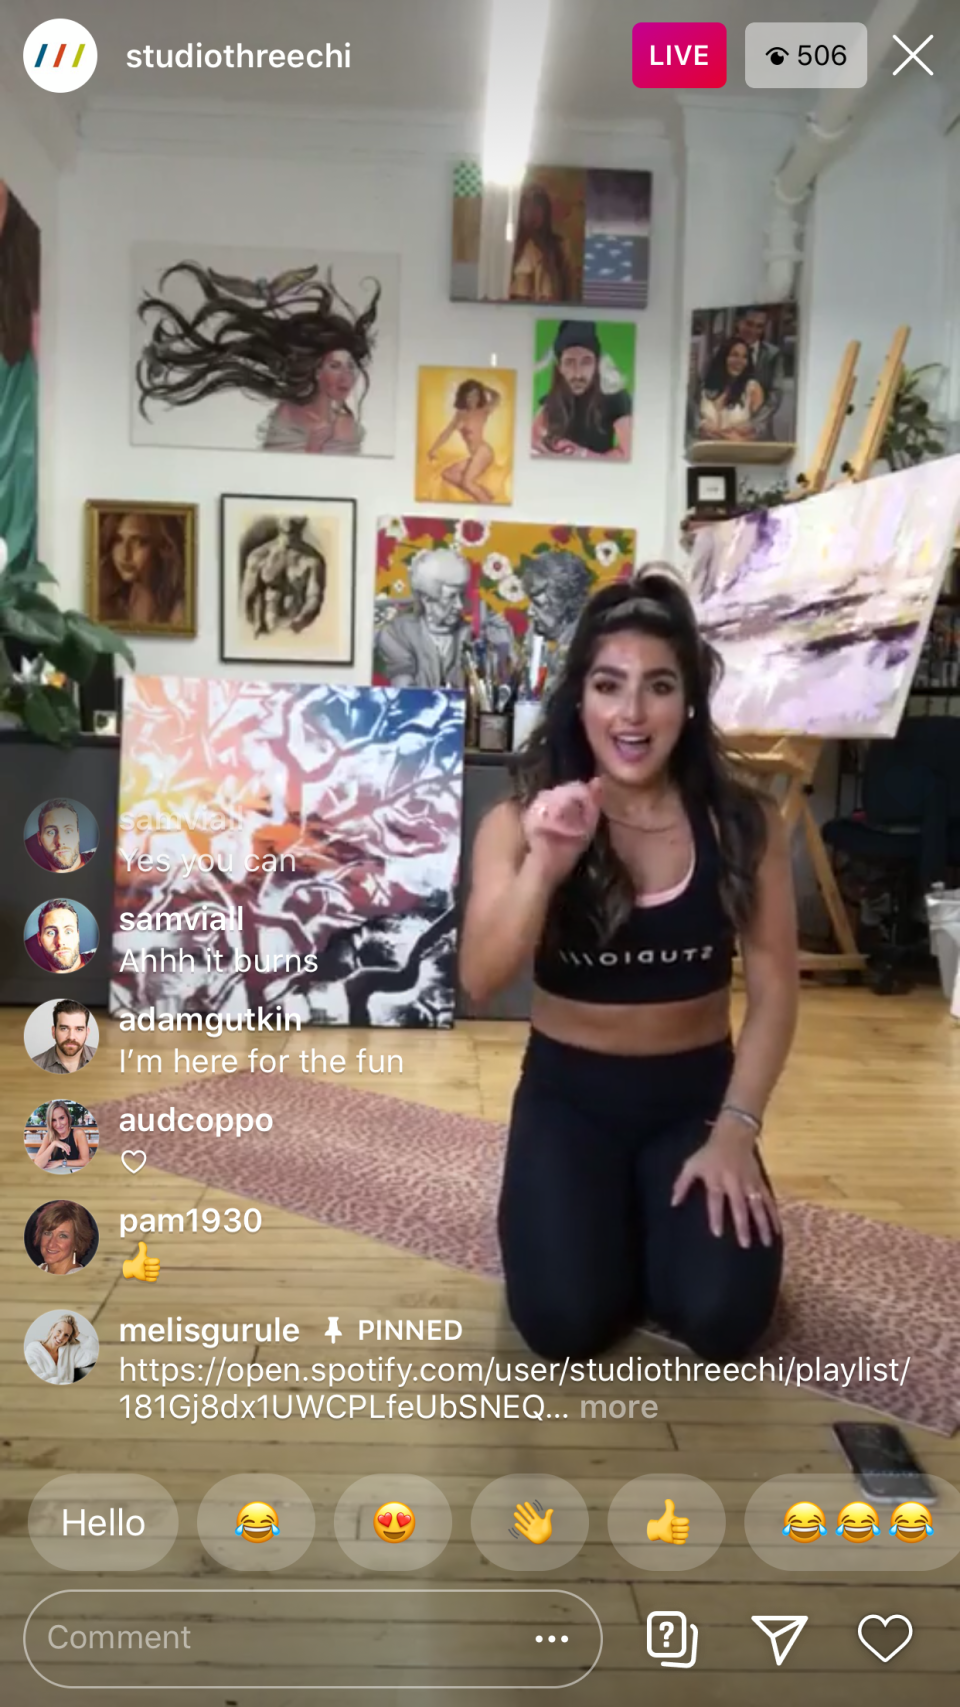 Yoga instructor (and artist) Tracee Badway teaches an Instagram Live class for followers of Studio Three's account, @studiothreechi.